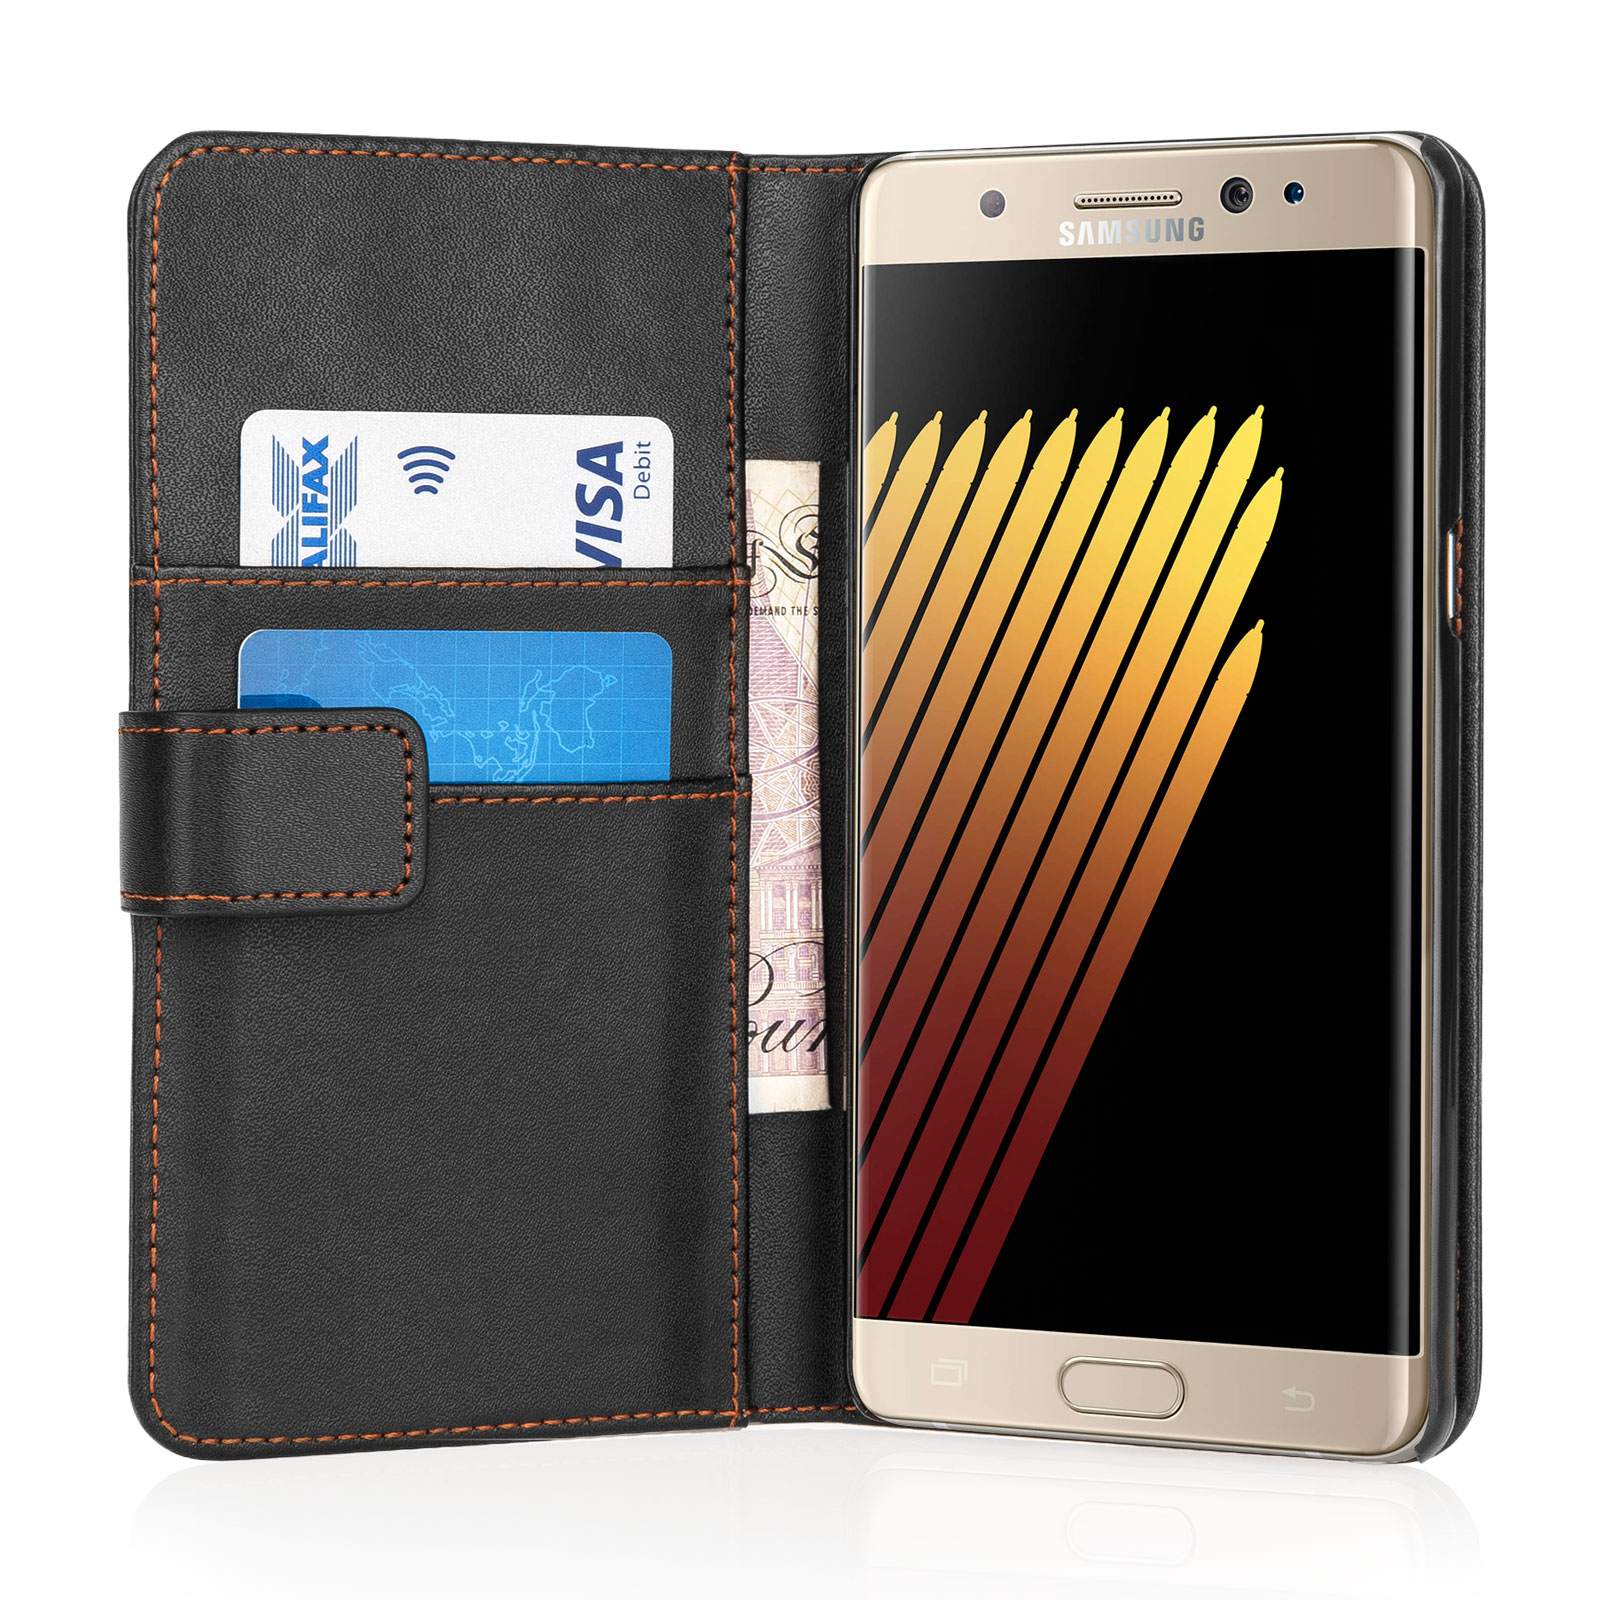 Yousave Accessories Samsung Galaxy Note 7 Leather-Effect Wallet Case - Black